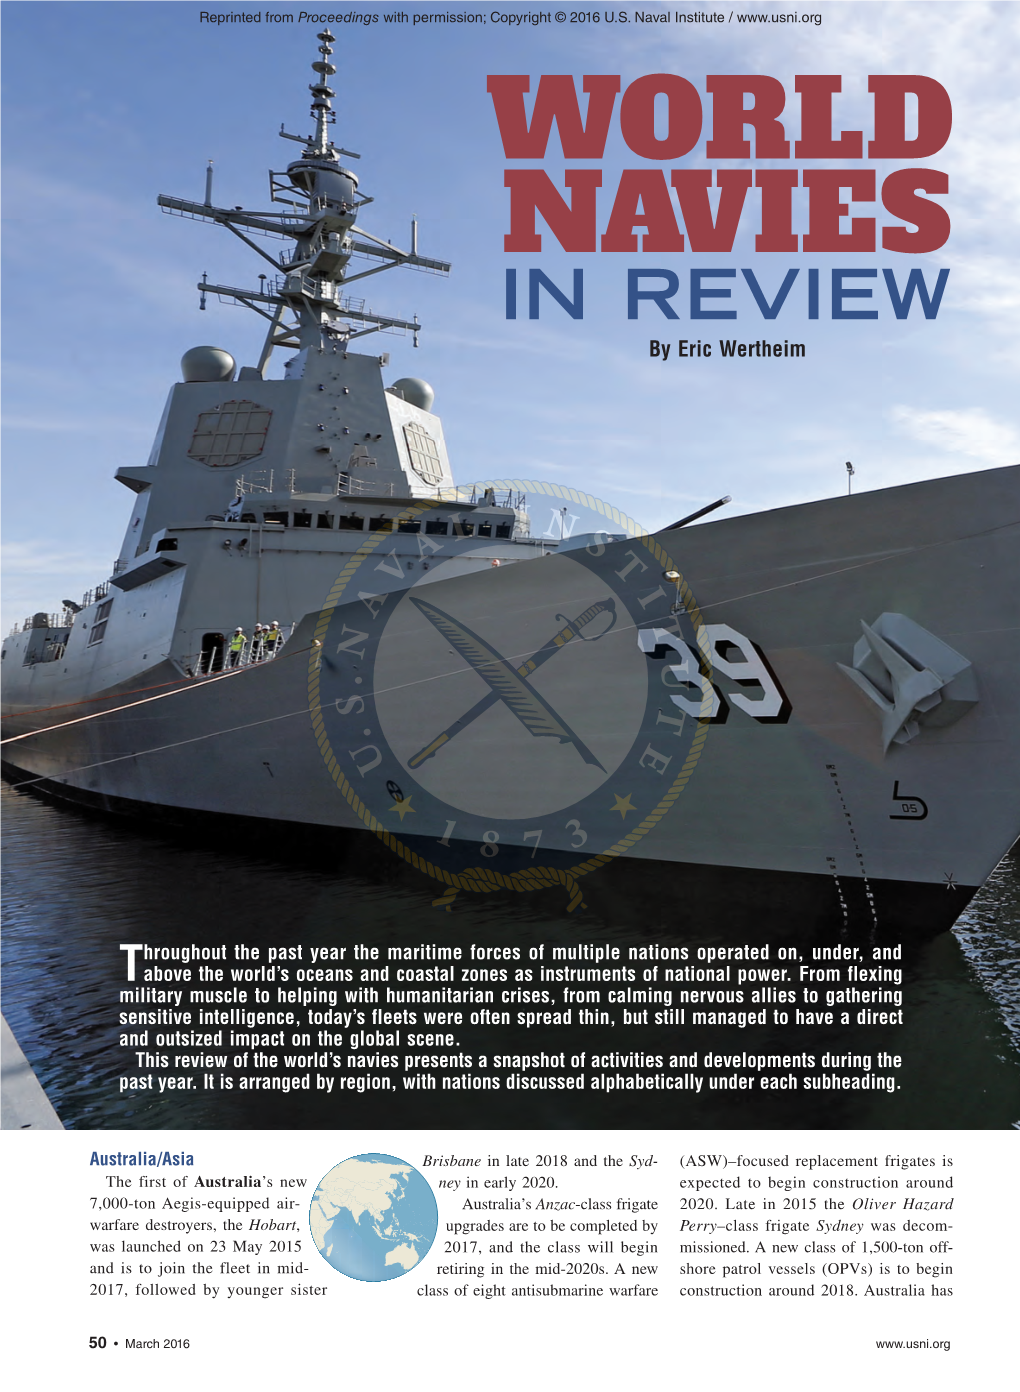 NAVIES in REVIEW by Eric Wertheim